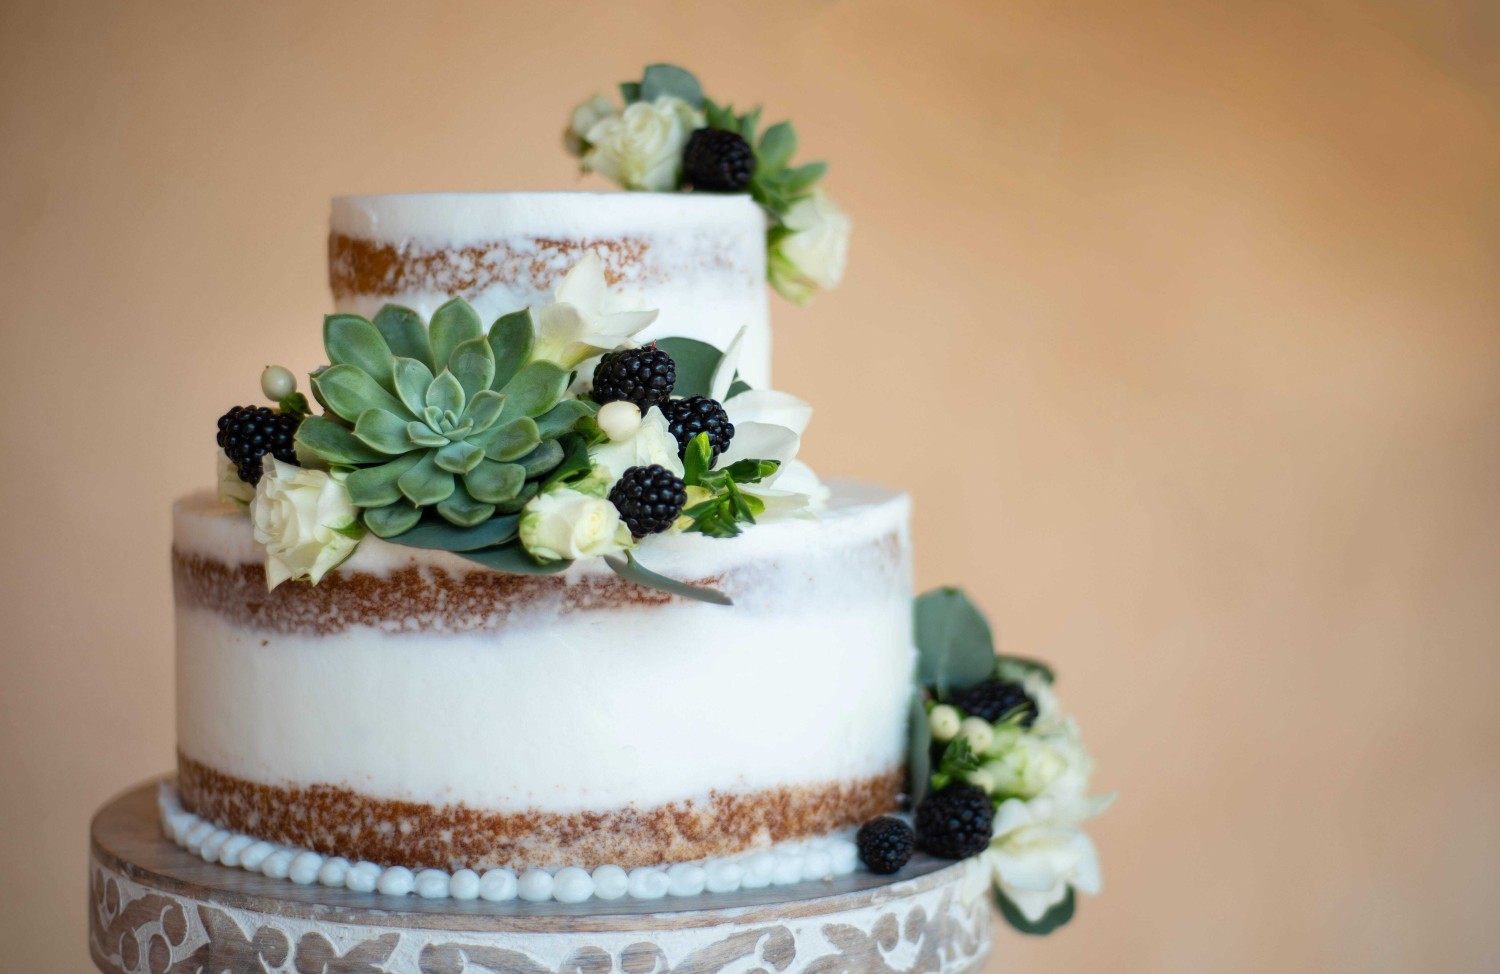 Amway Grand_Wedding Cake_Two Tiers_White Frosting_Green Flowers_White Flowers_Blackberries